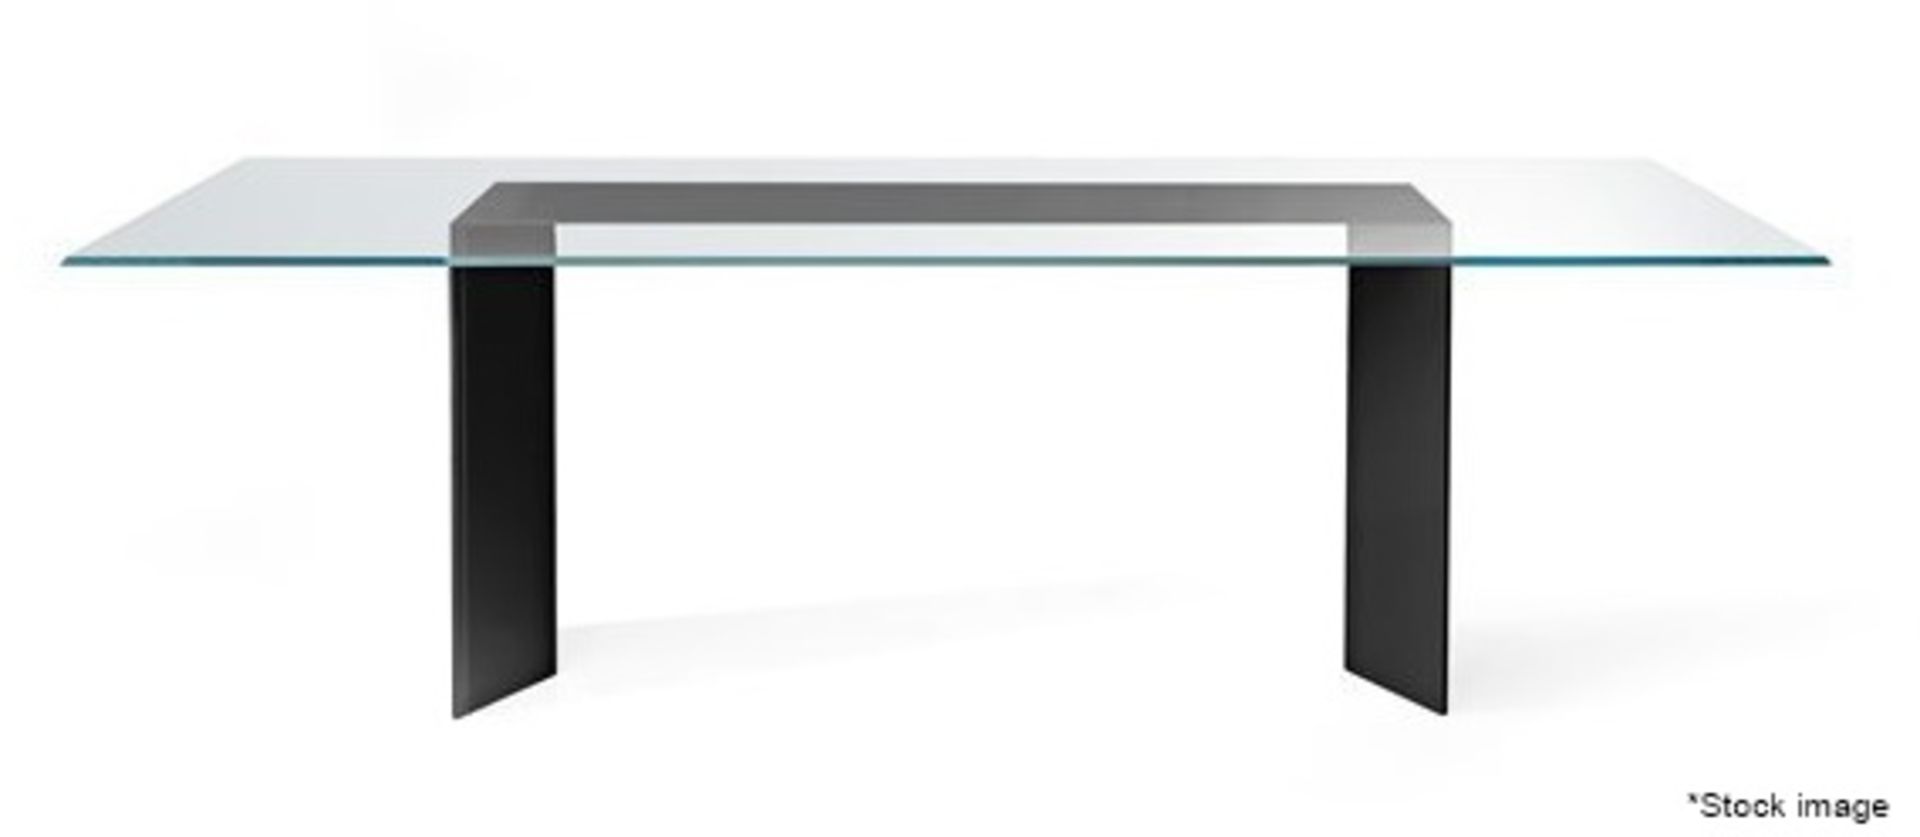 1 x GALLOTTI & RADICE 'Dolm' 2.4-Metre Luxury Dining Table With Painted Glass Top - RRP £3,645 - Image 3 of 12